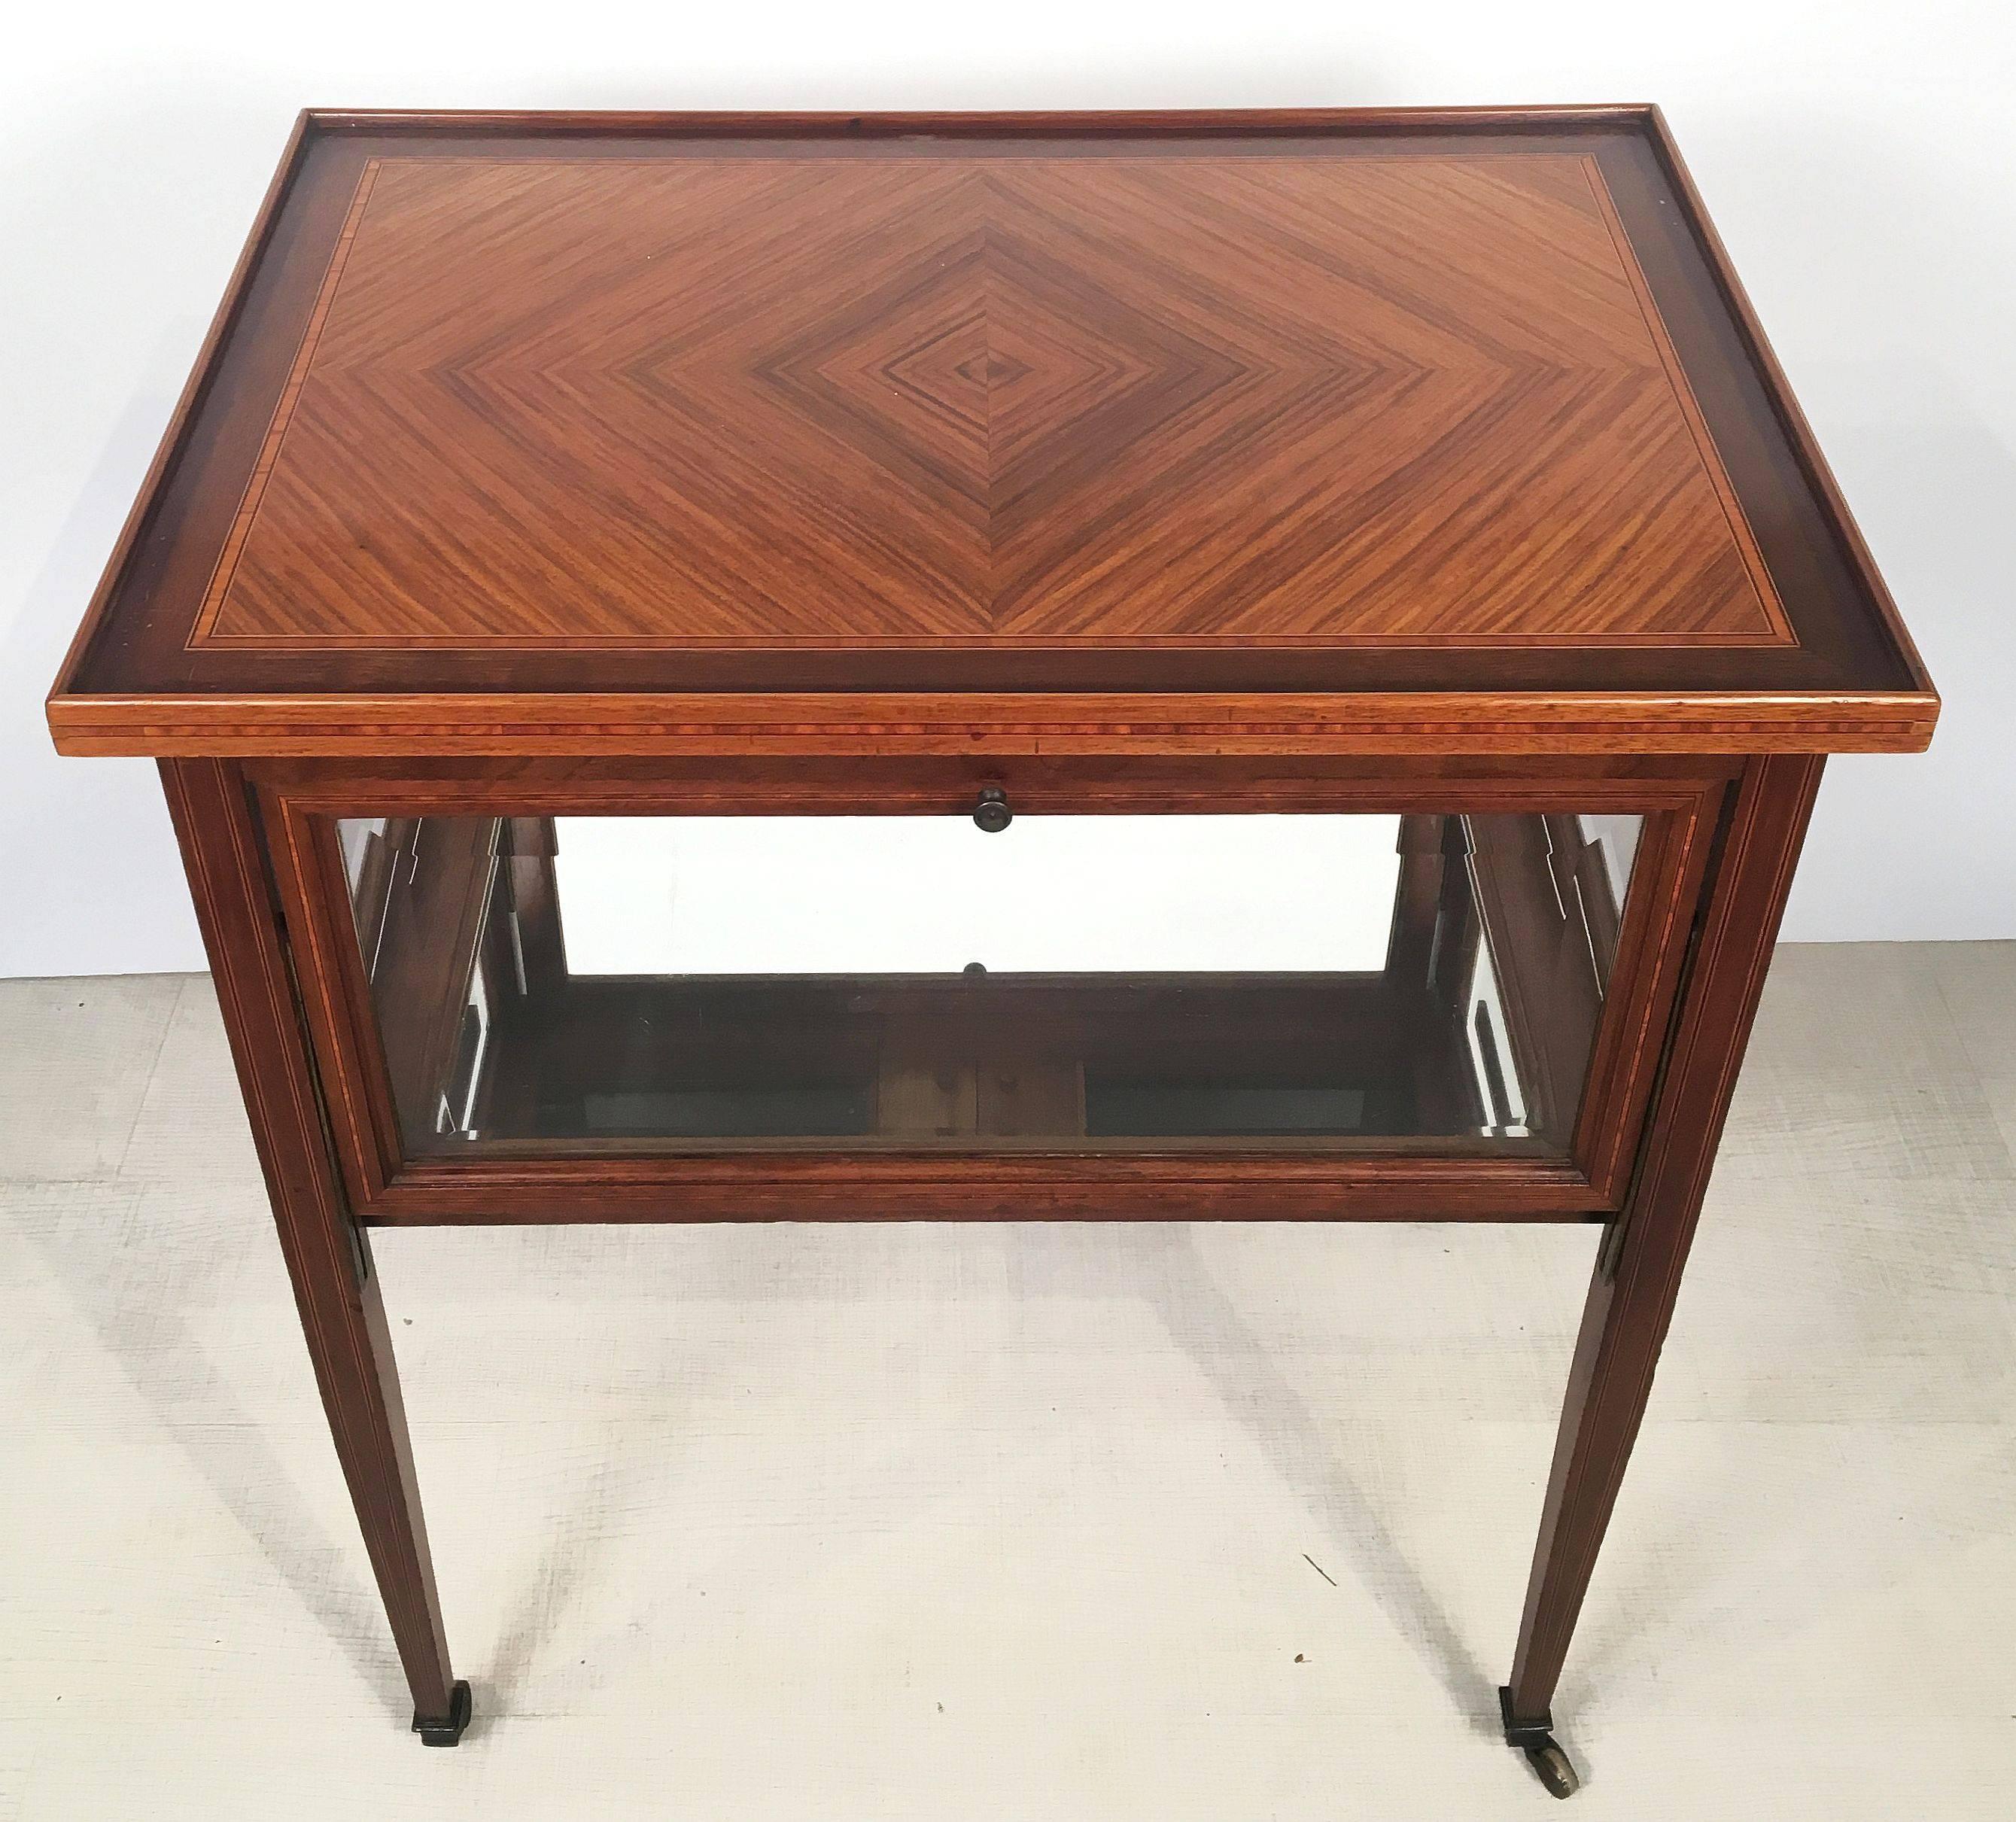 20th Century English Drinks Cart or Fold-Down Tea Table with Removable Tray Top